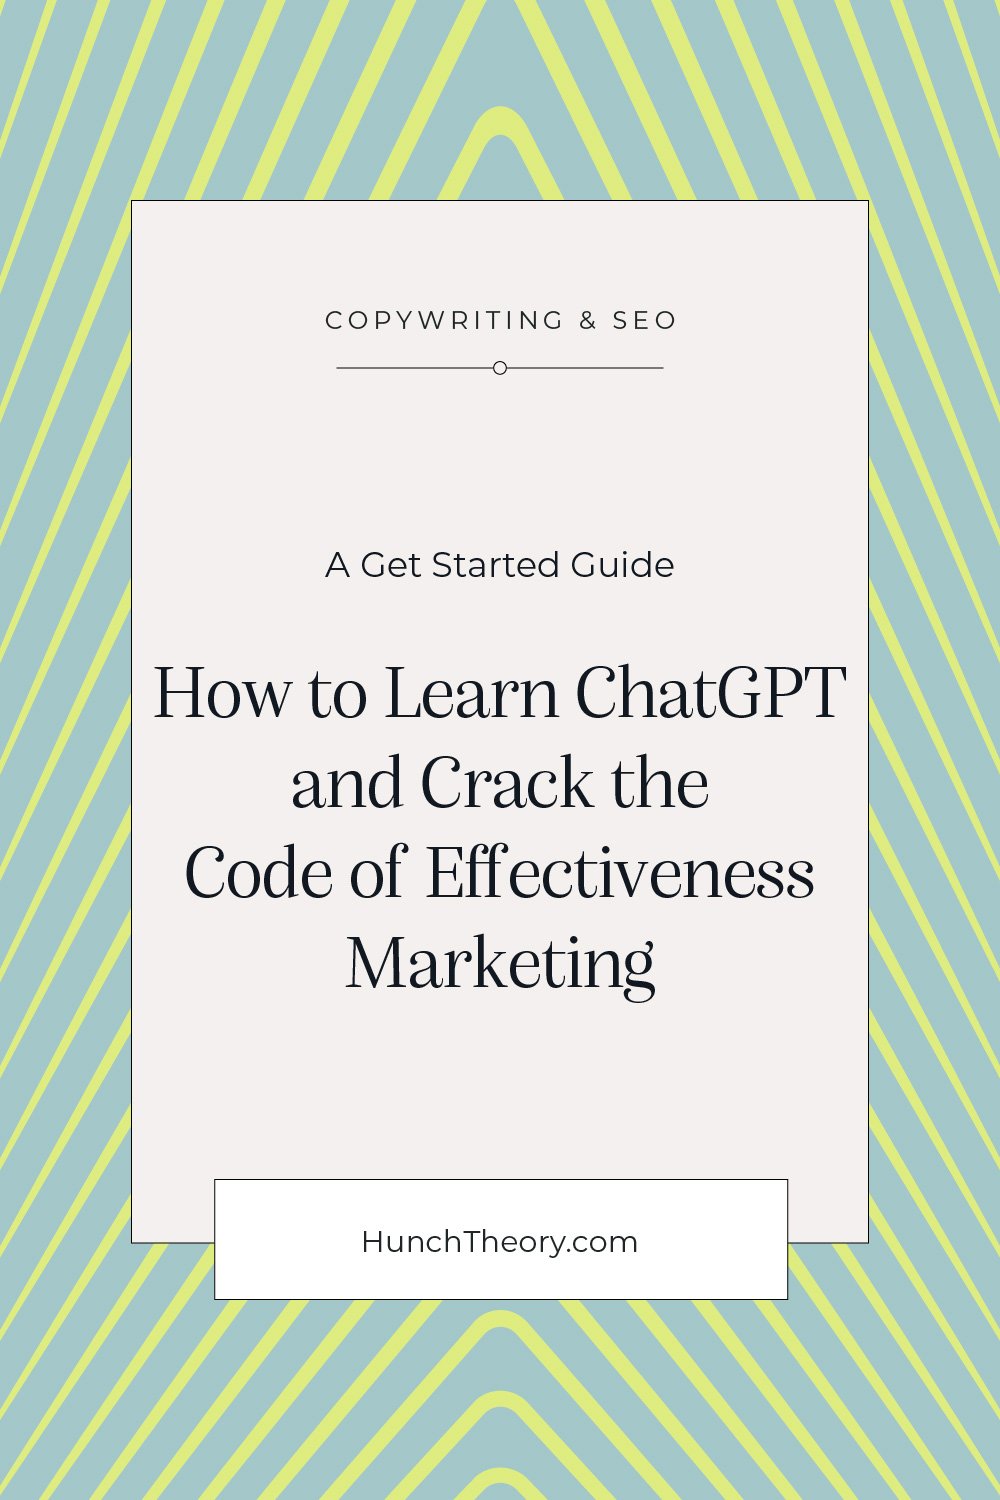 A Get Started Guide: How to Learn ChatGPT and Crack the Code